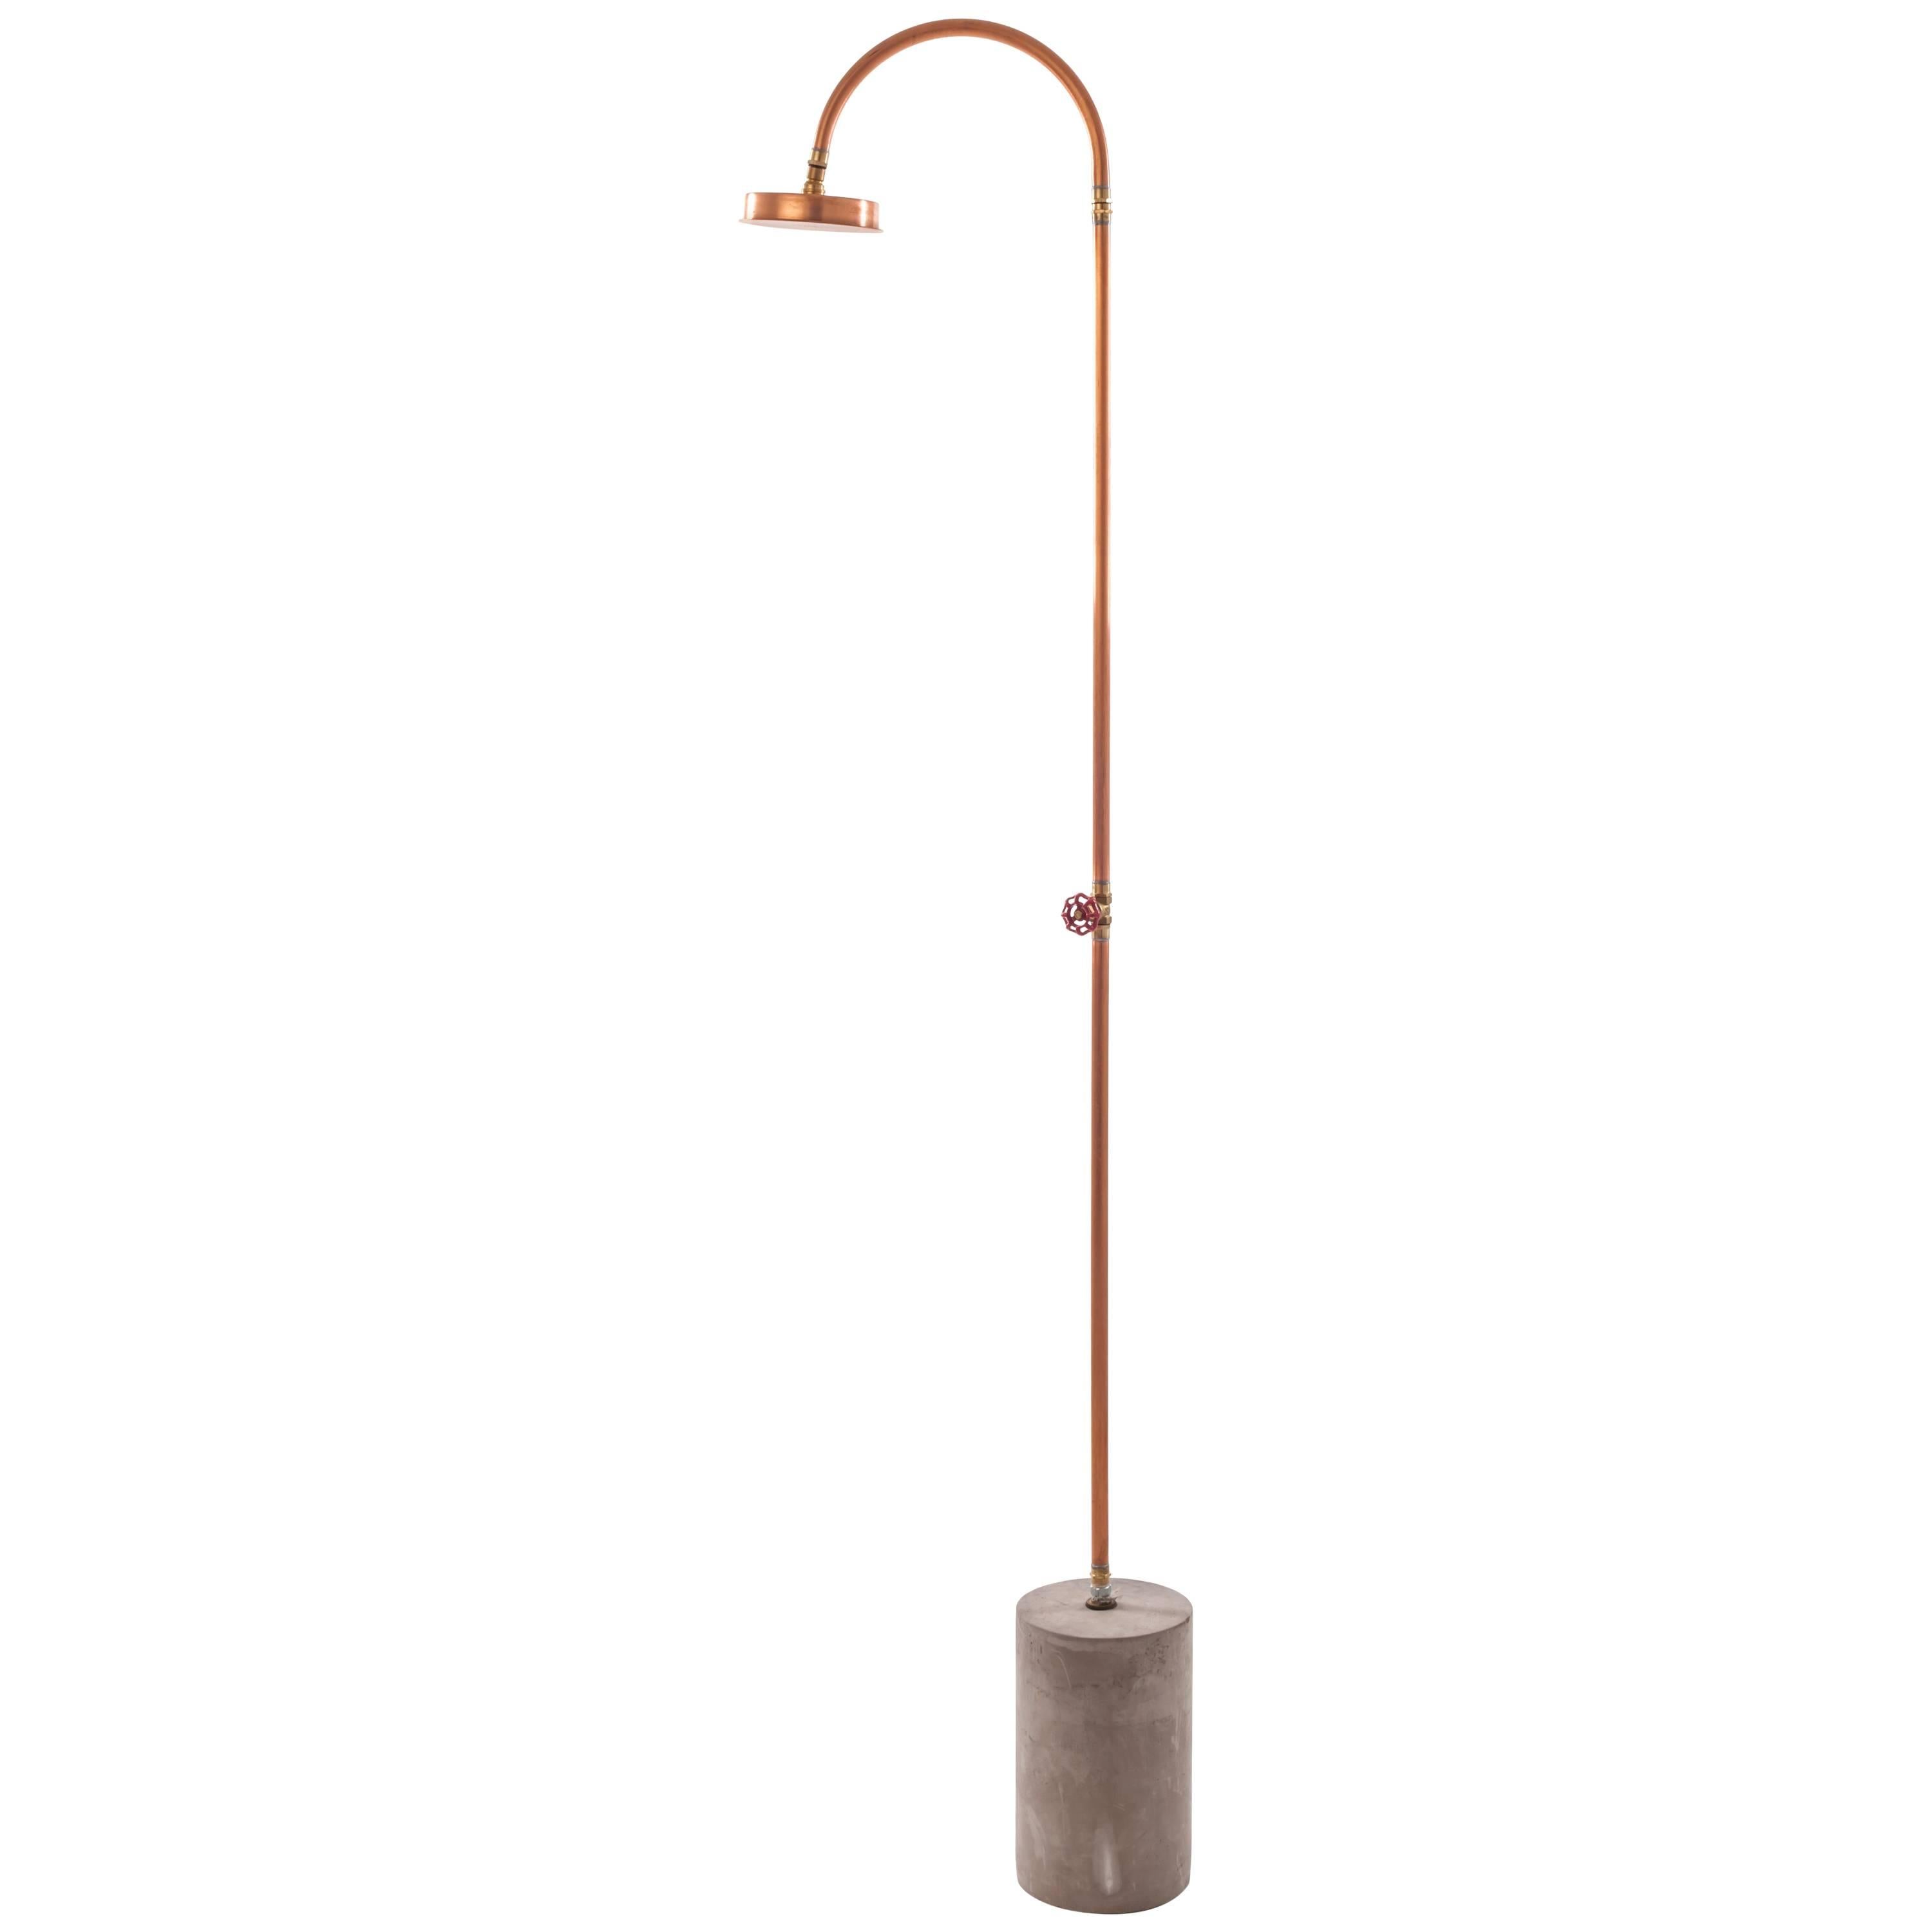 Seletti "Aquart Lux" Shower and Base in Copper and Concrete For Sale